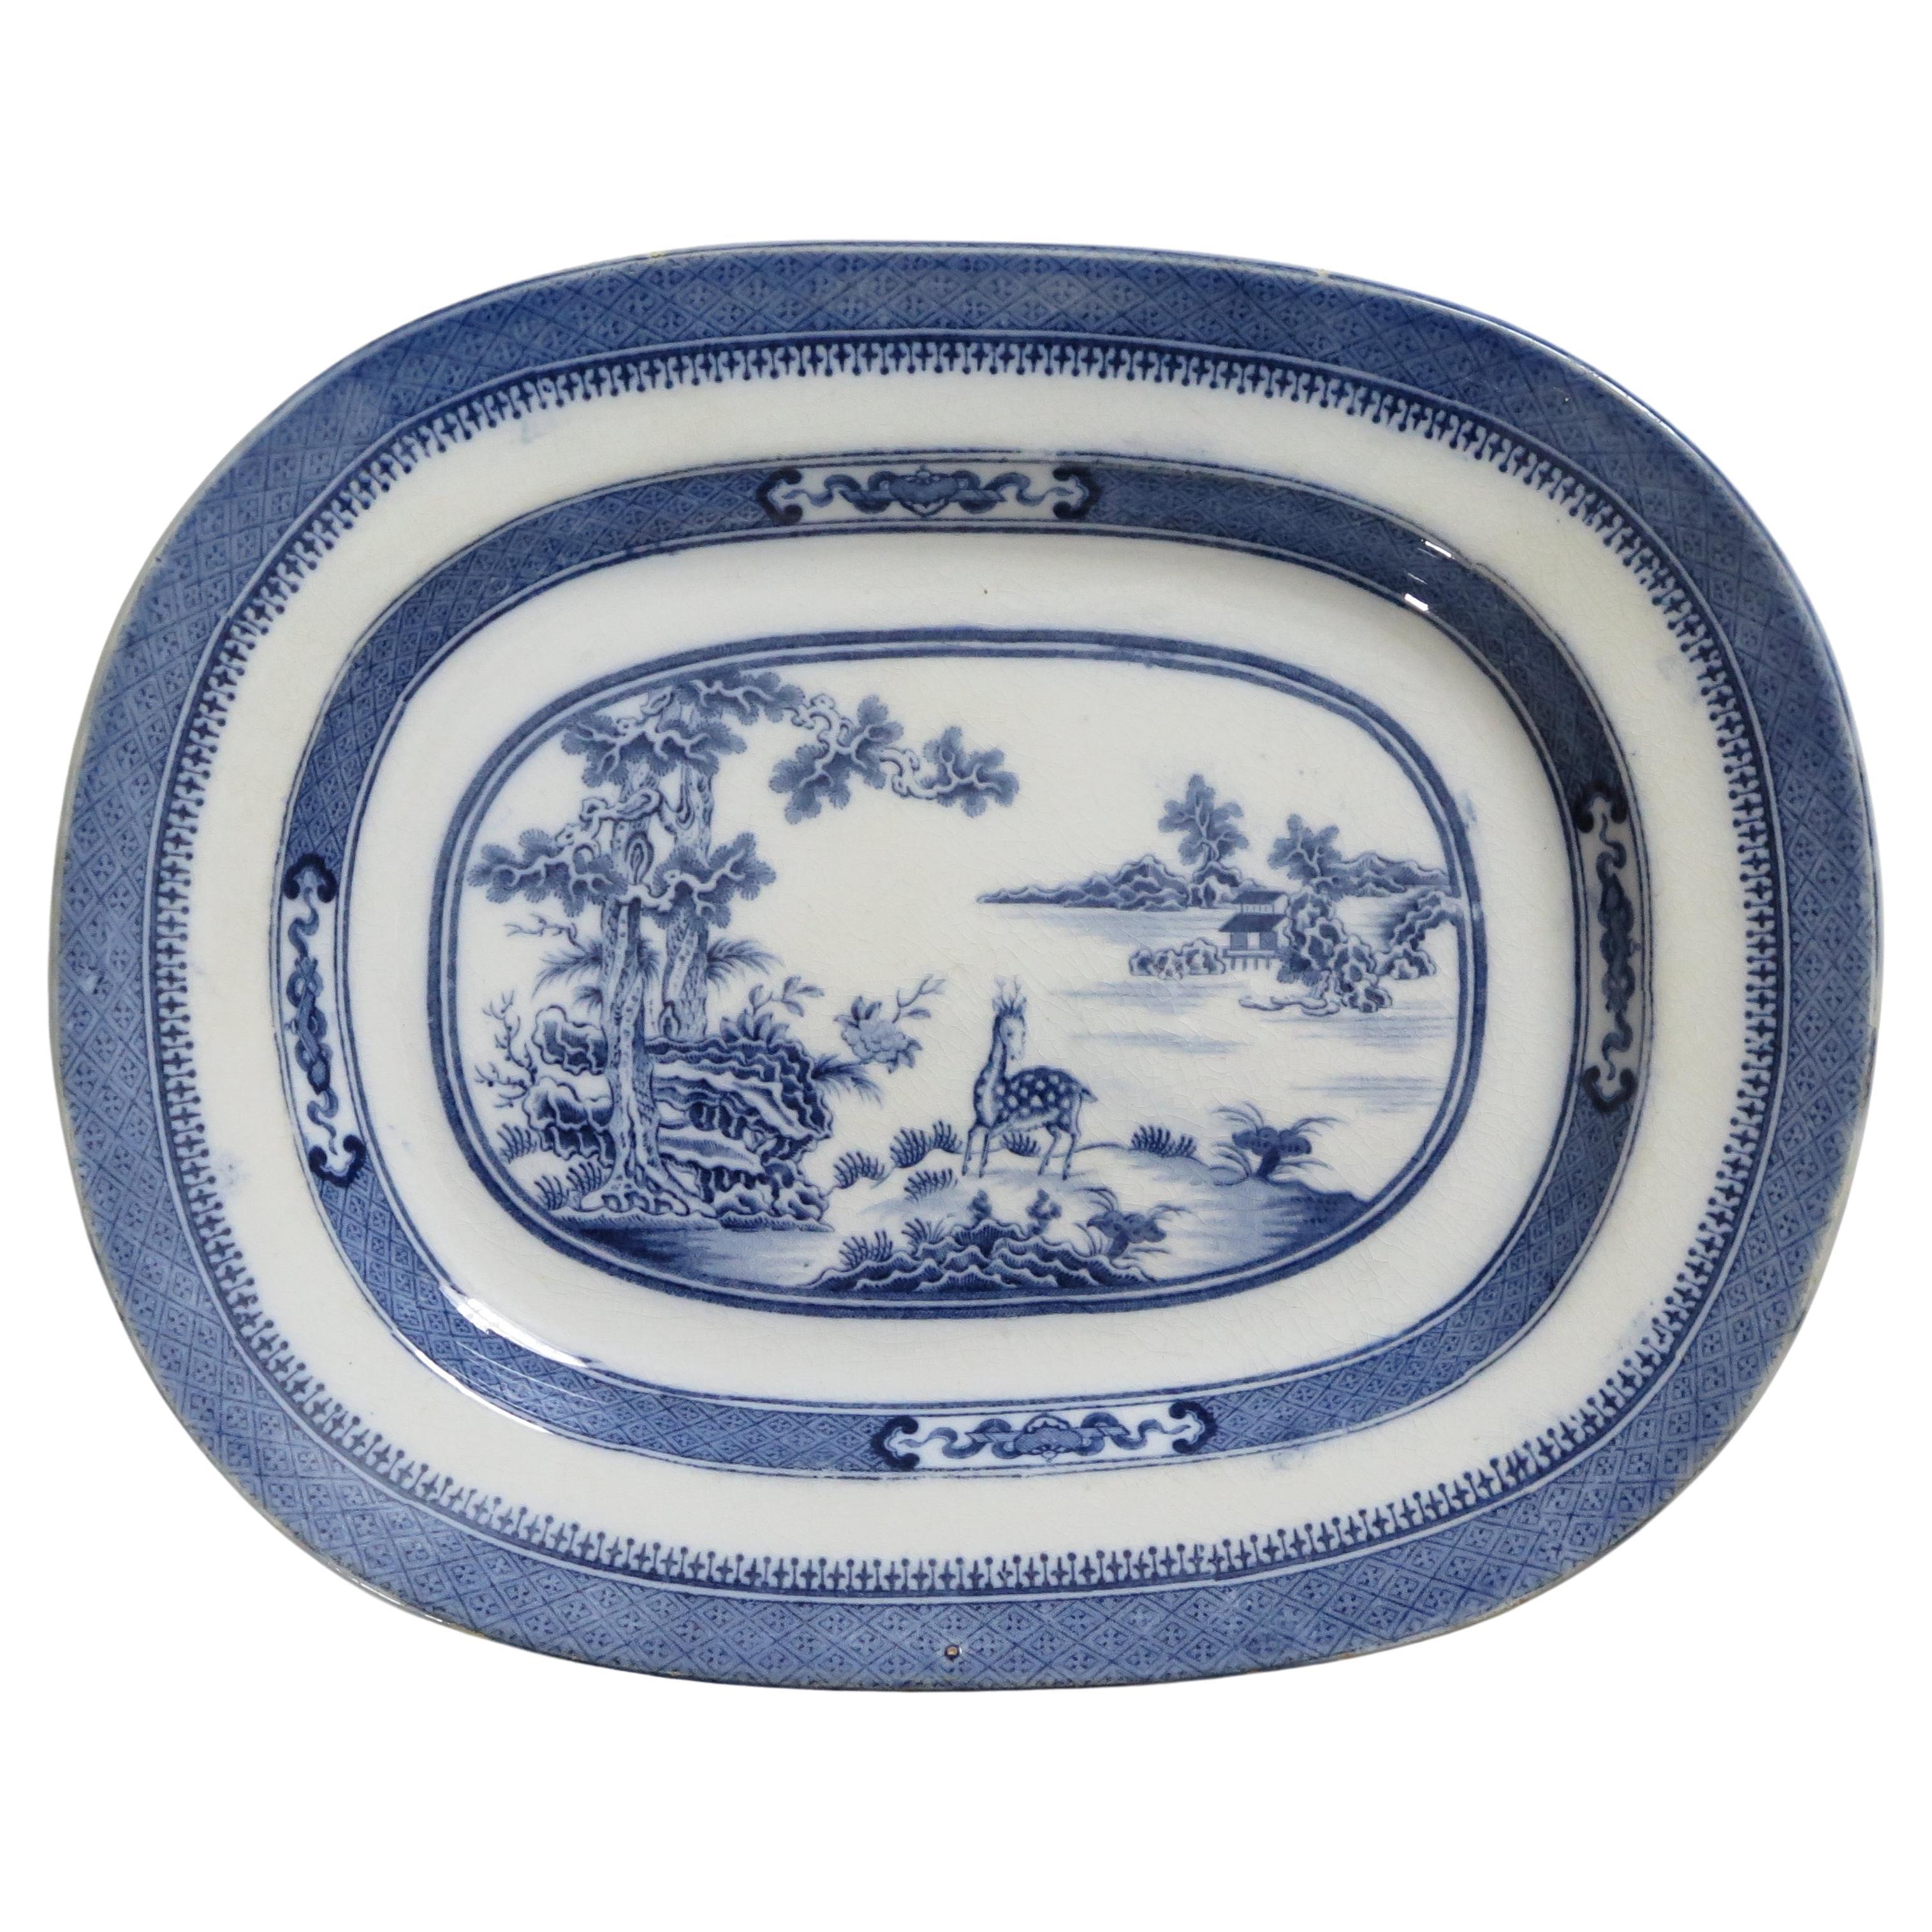 Early 19th C. Pearlware Blue & White Dish or Plate Chital Deer India Ptn, Ca 1820